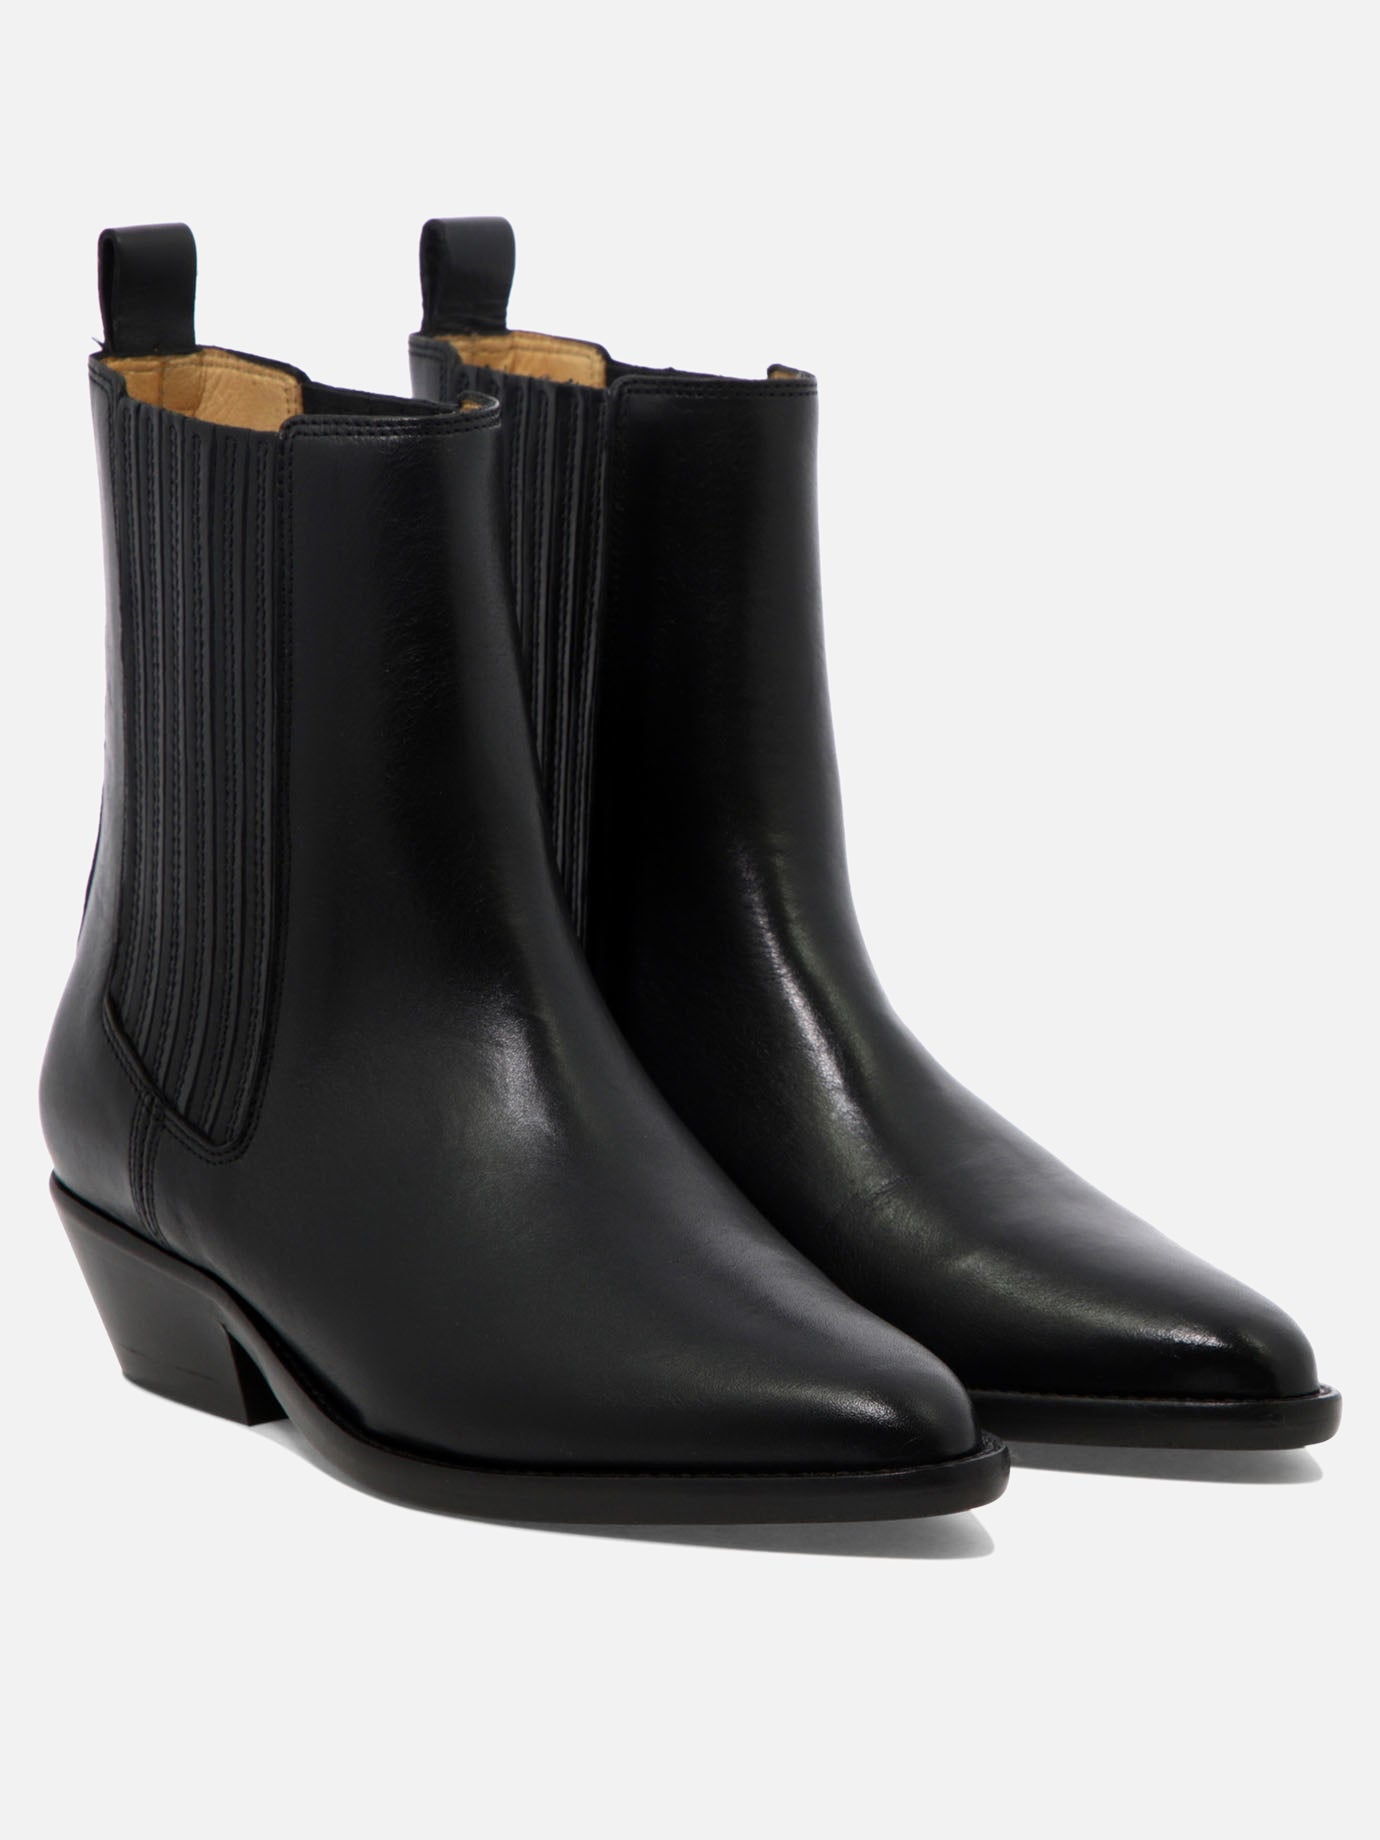 "Delena" ankle boots